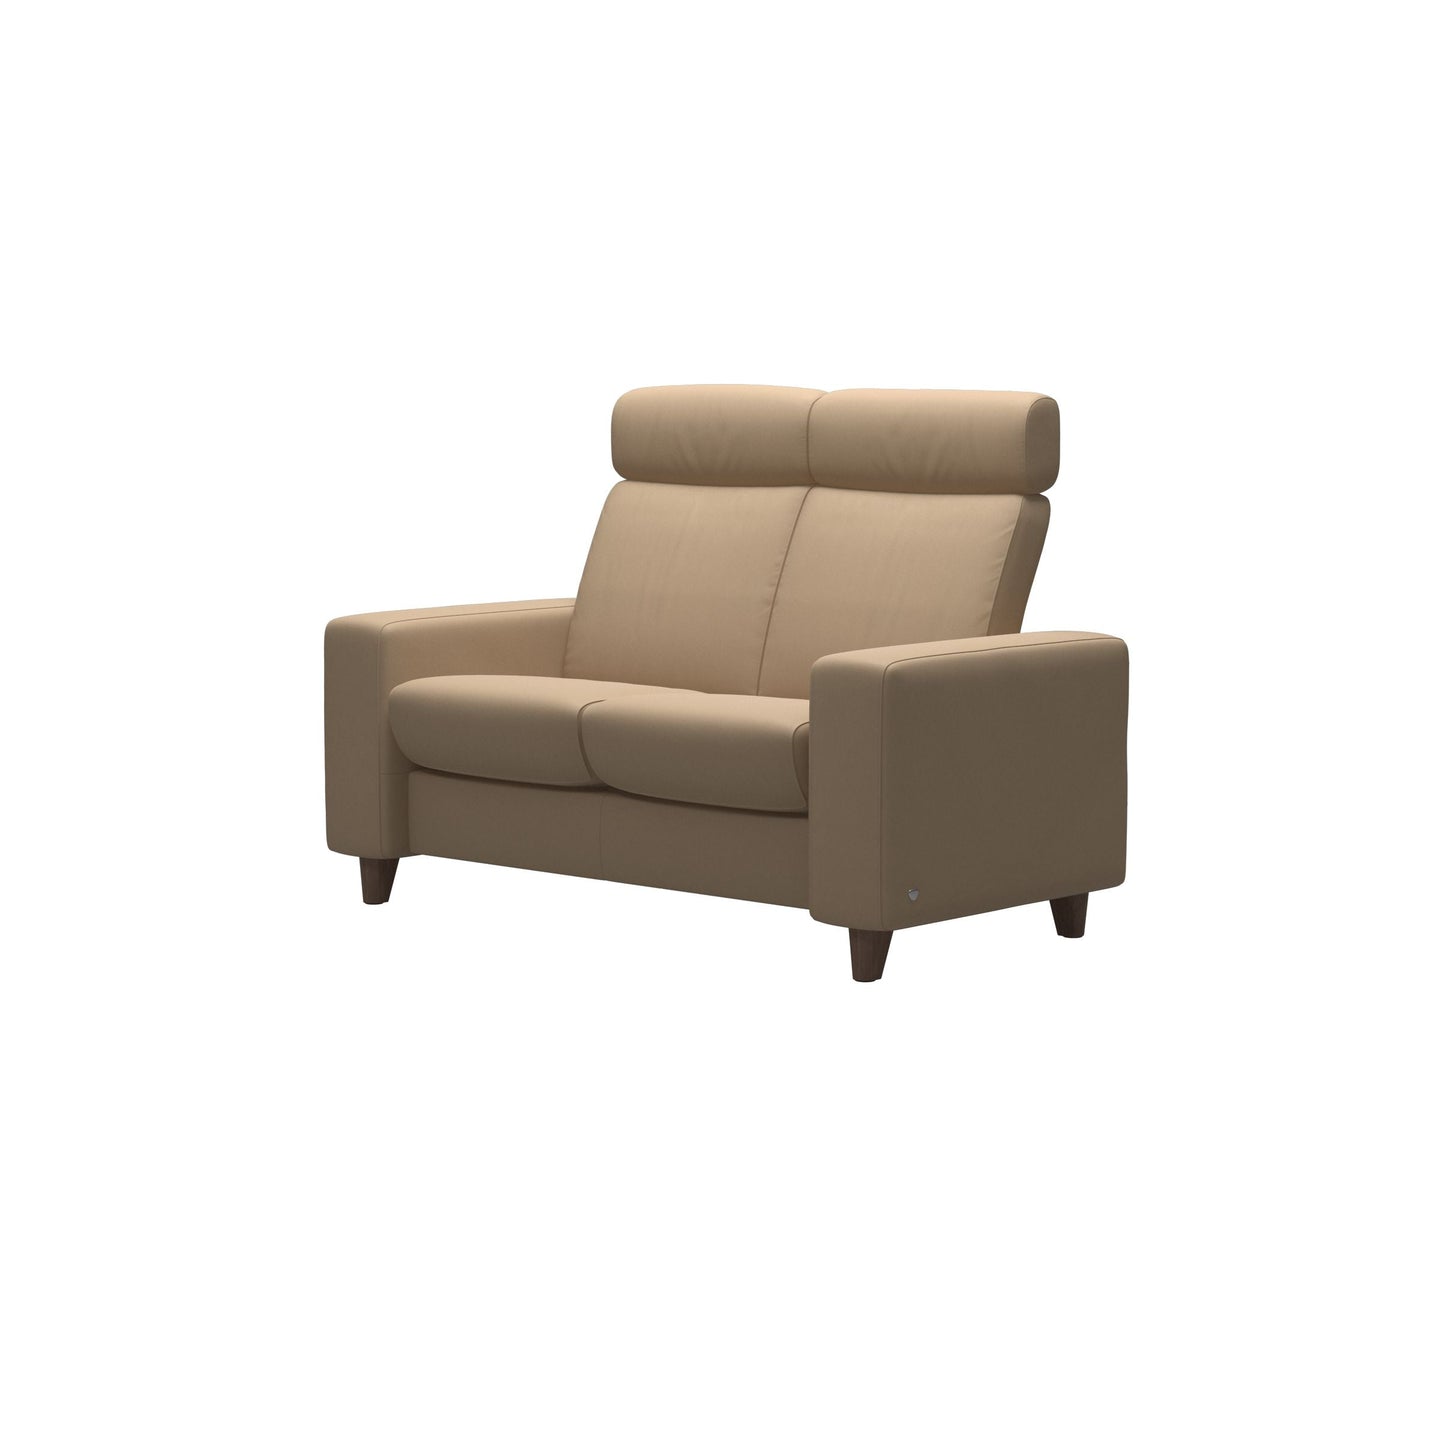 Stressless® Arion 19 A20 2 seater High back